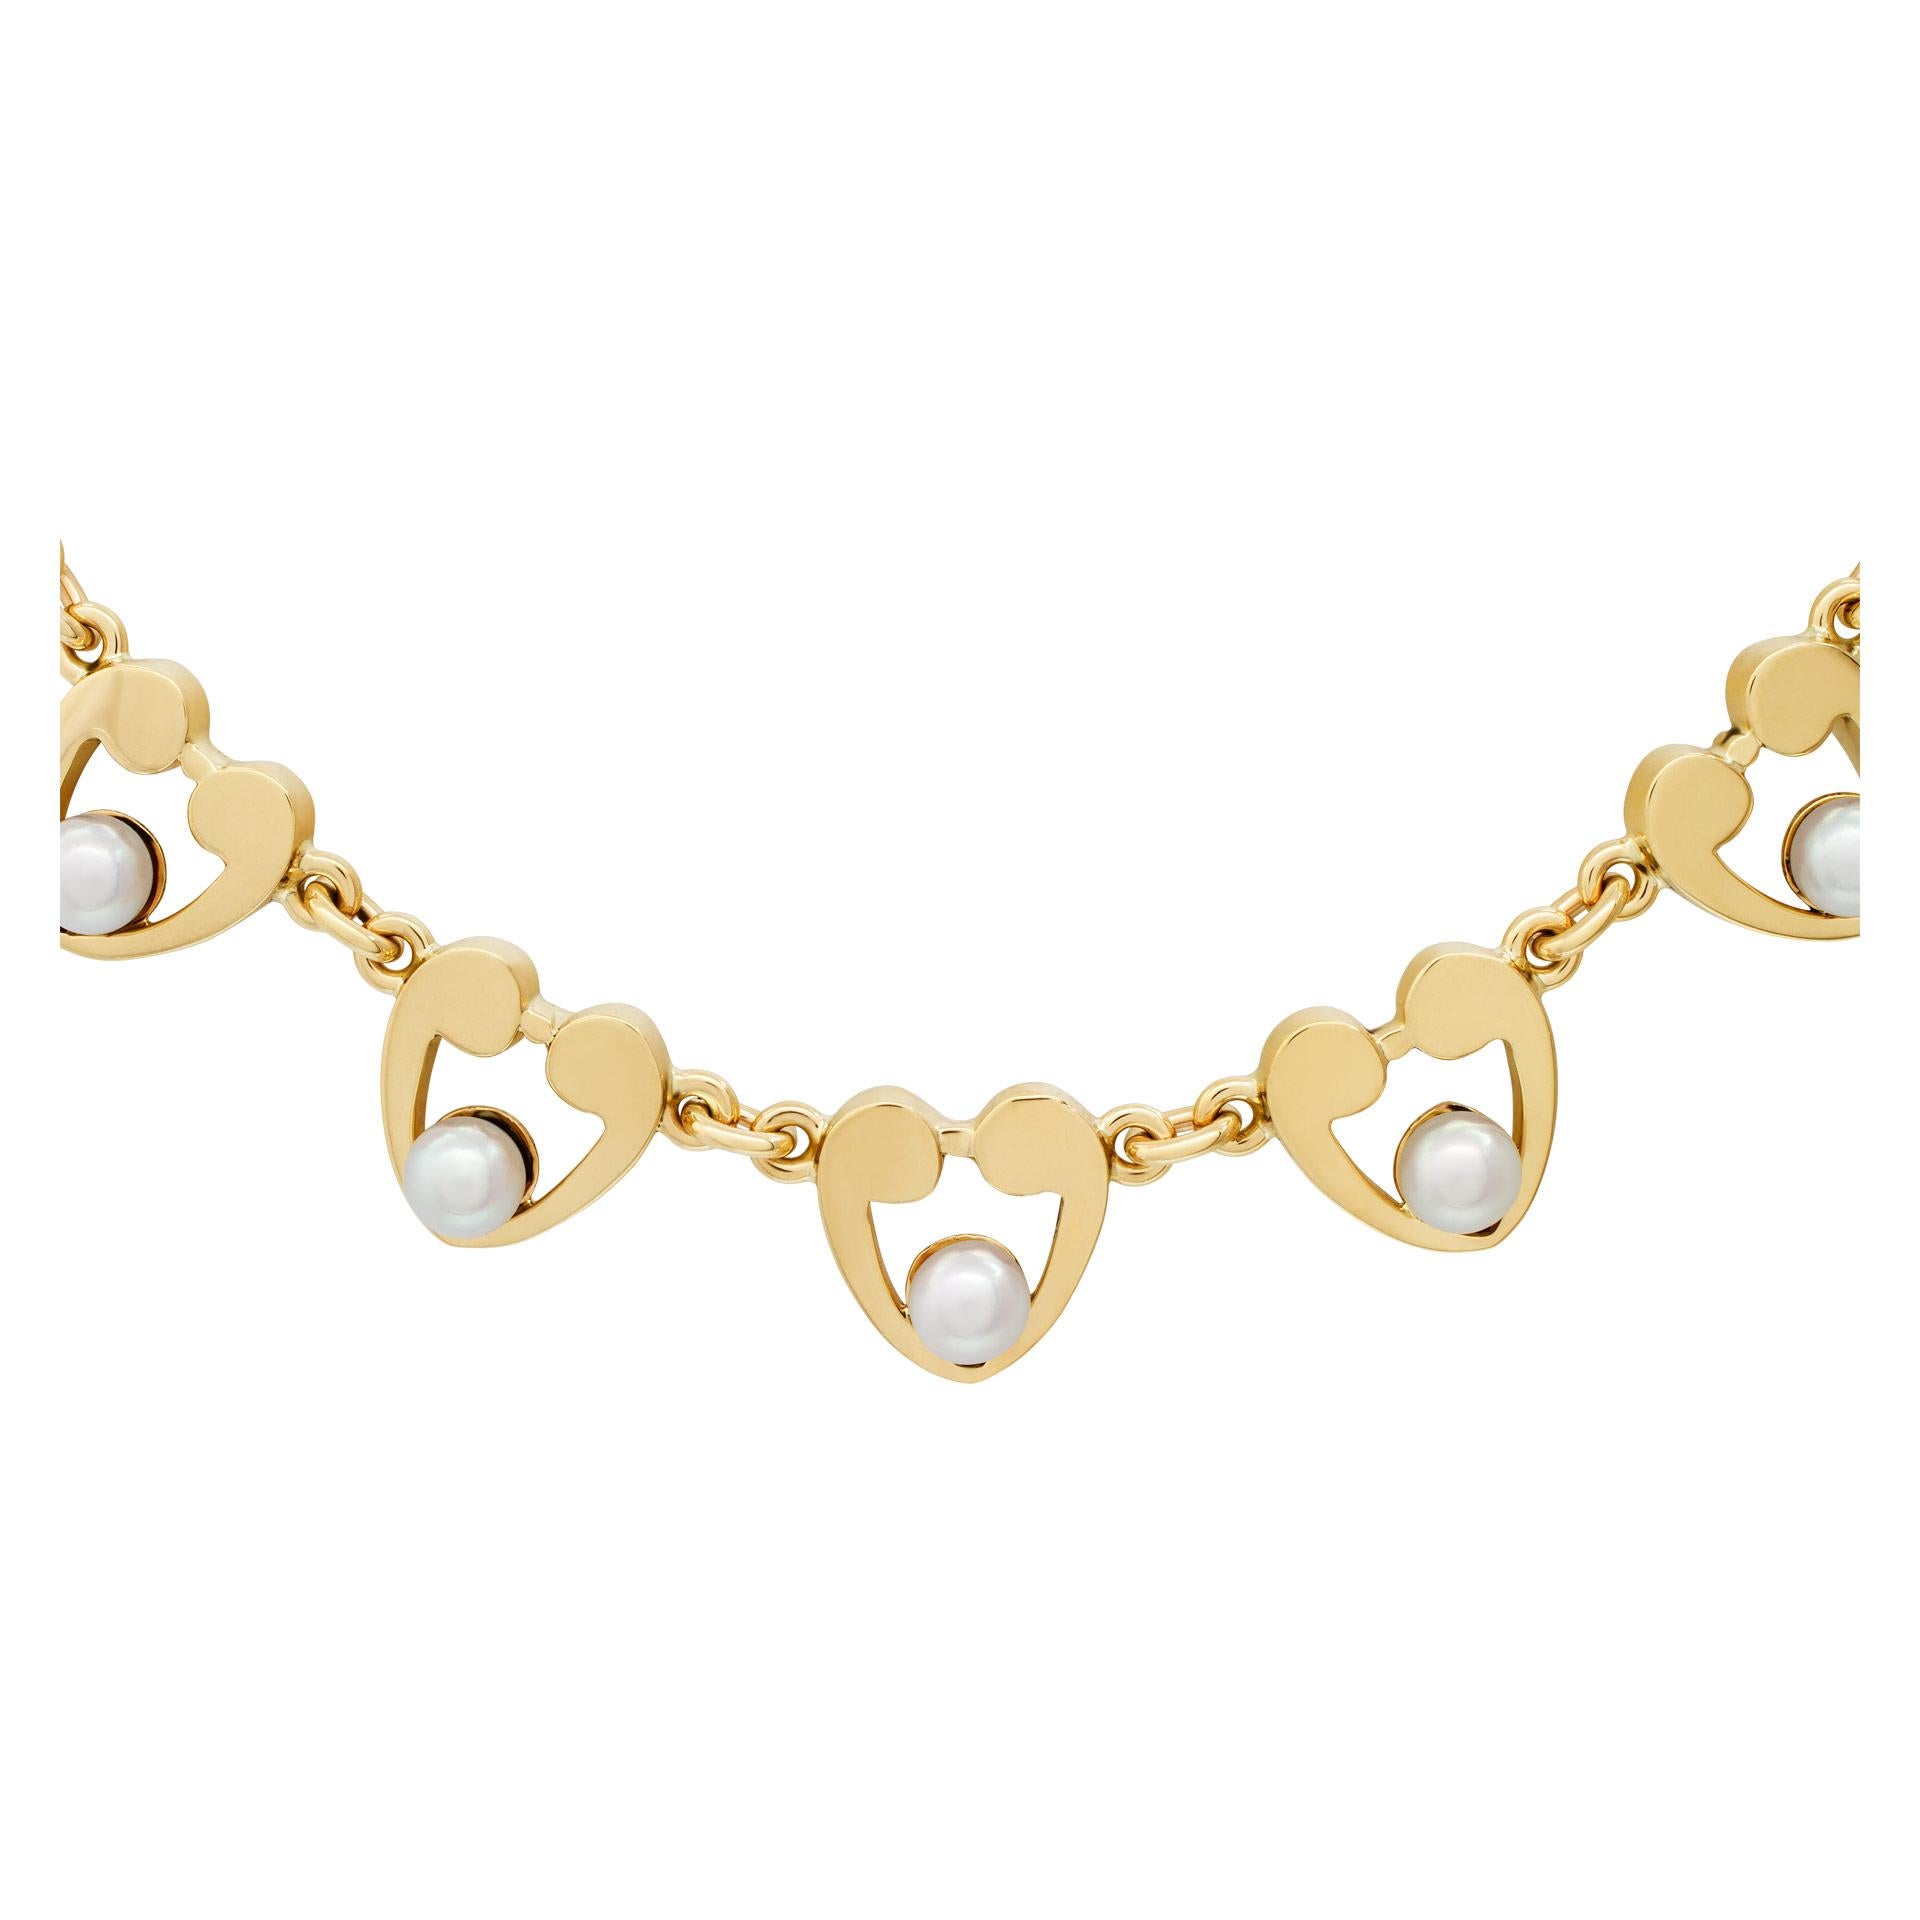 ESTIMATED RETAIL: $6,720 YOUR PRICE: $4,200 - Precious heart link choker necklace with 5mm pearls in 14k yellow gold. Length: 15''.